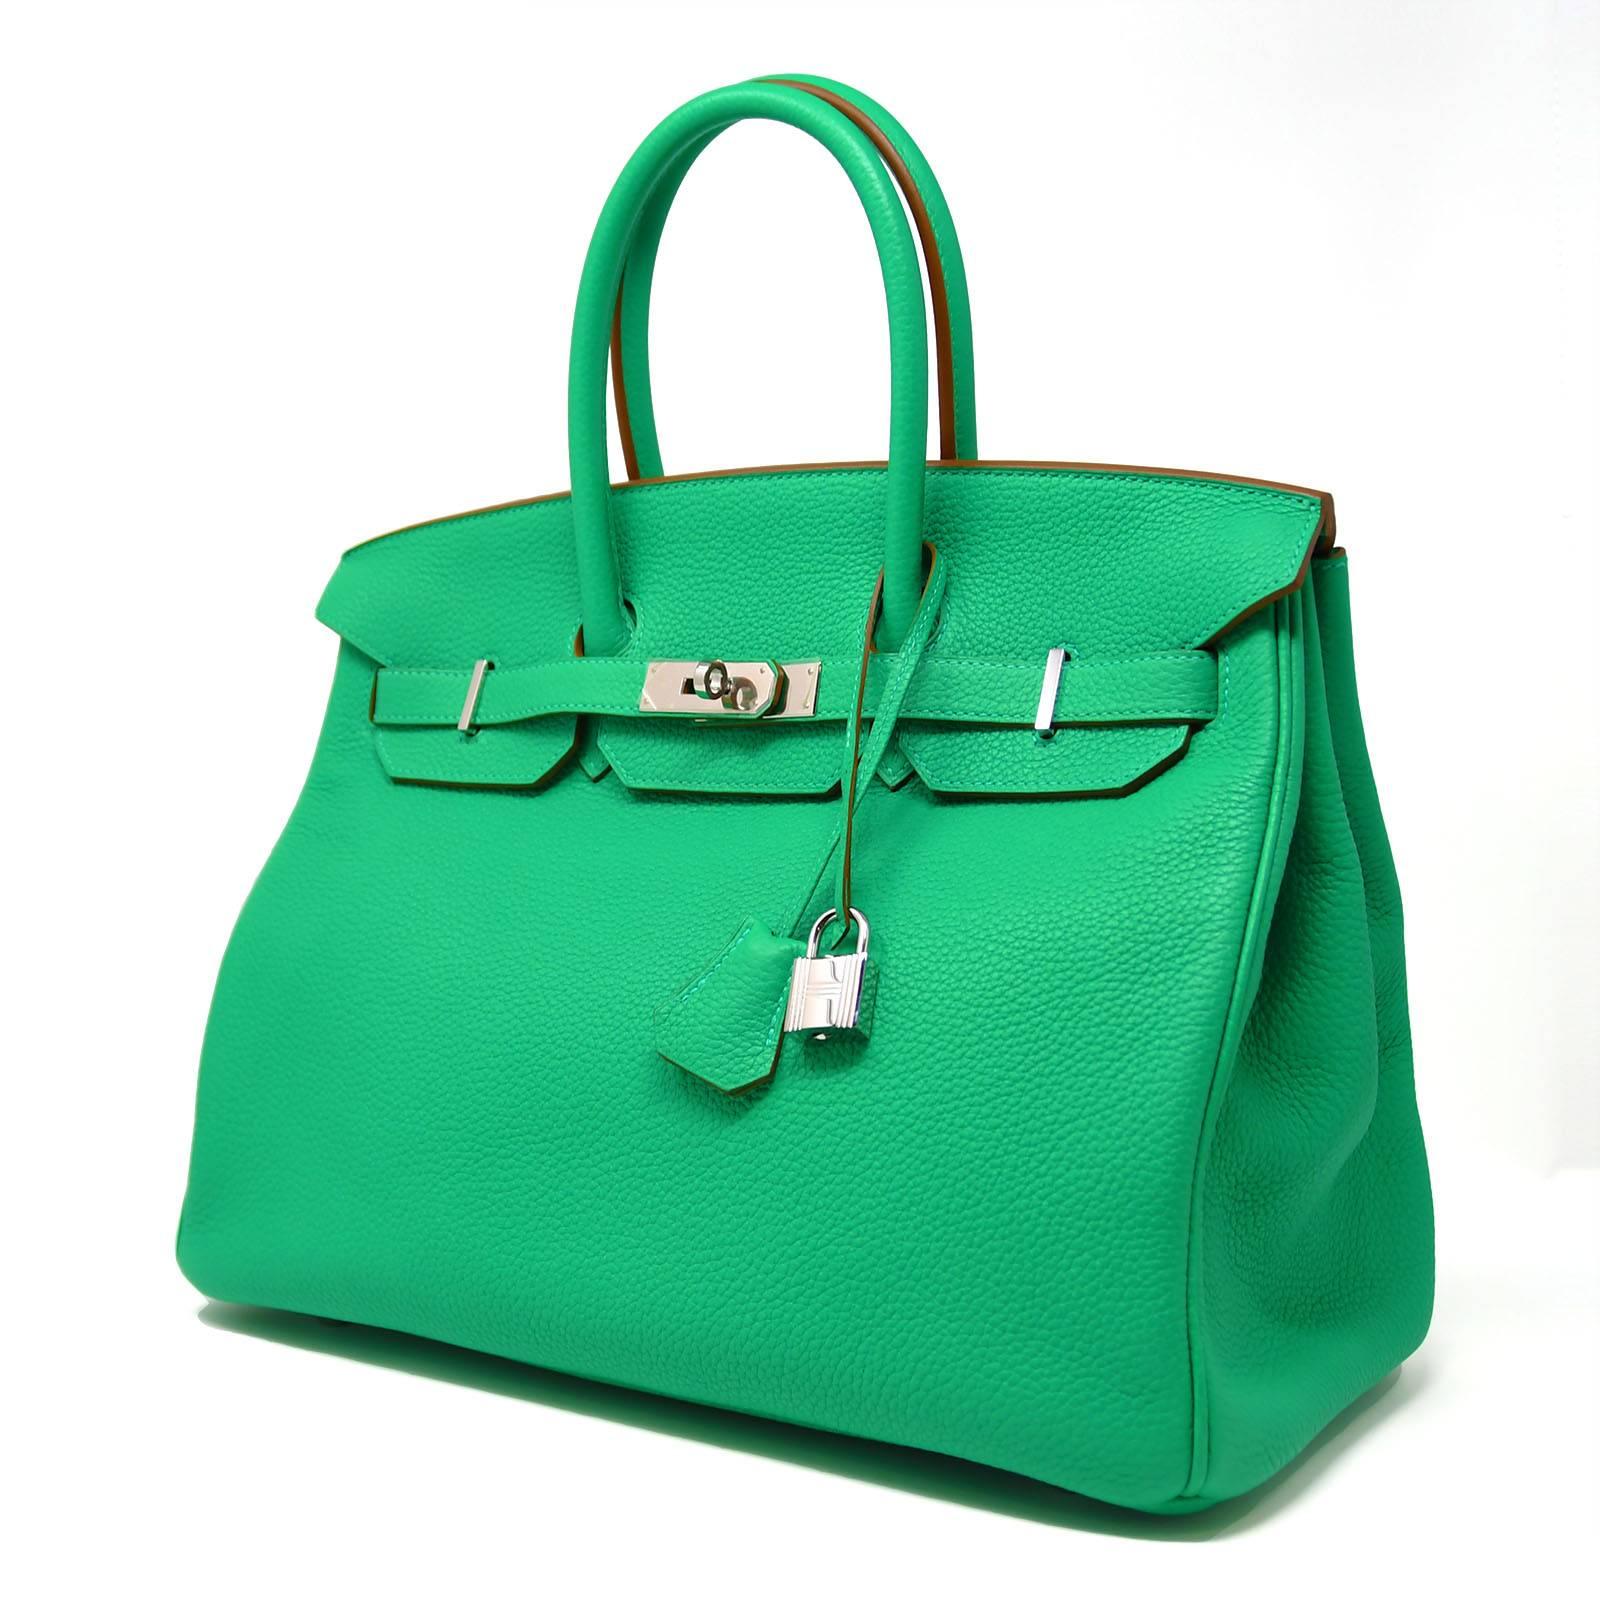 Brand new green menthe Birkin bag with plastic on the hardware. Fun and vibrant color for summer. Extremely rare color. Not made anymore. Bag comes with dust bag, raincoat, signature Hermes box, and clochette. 